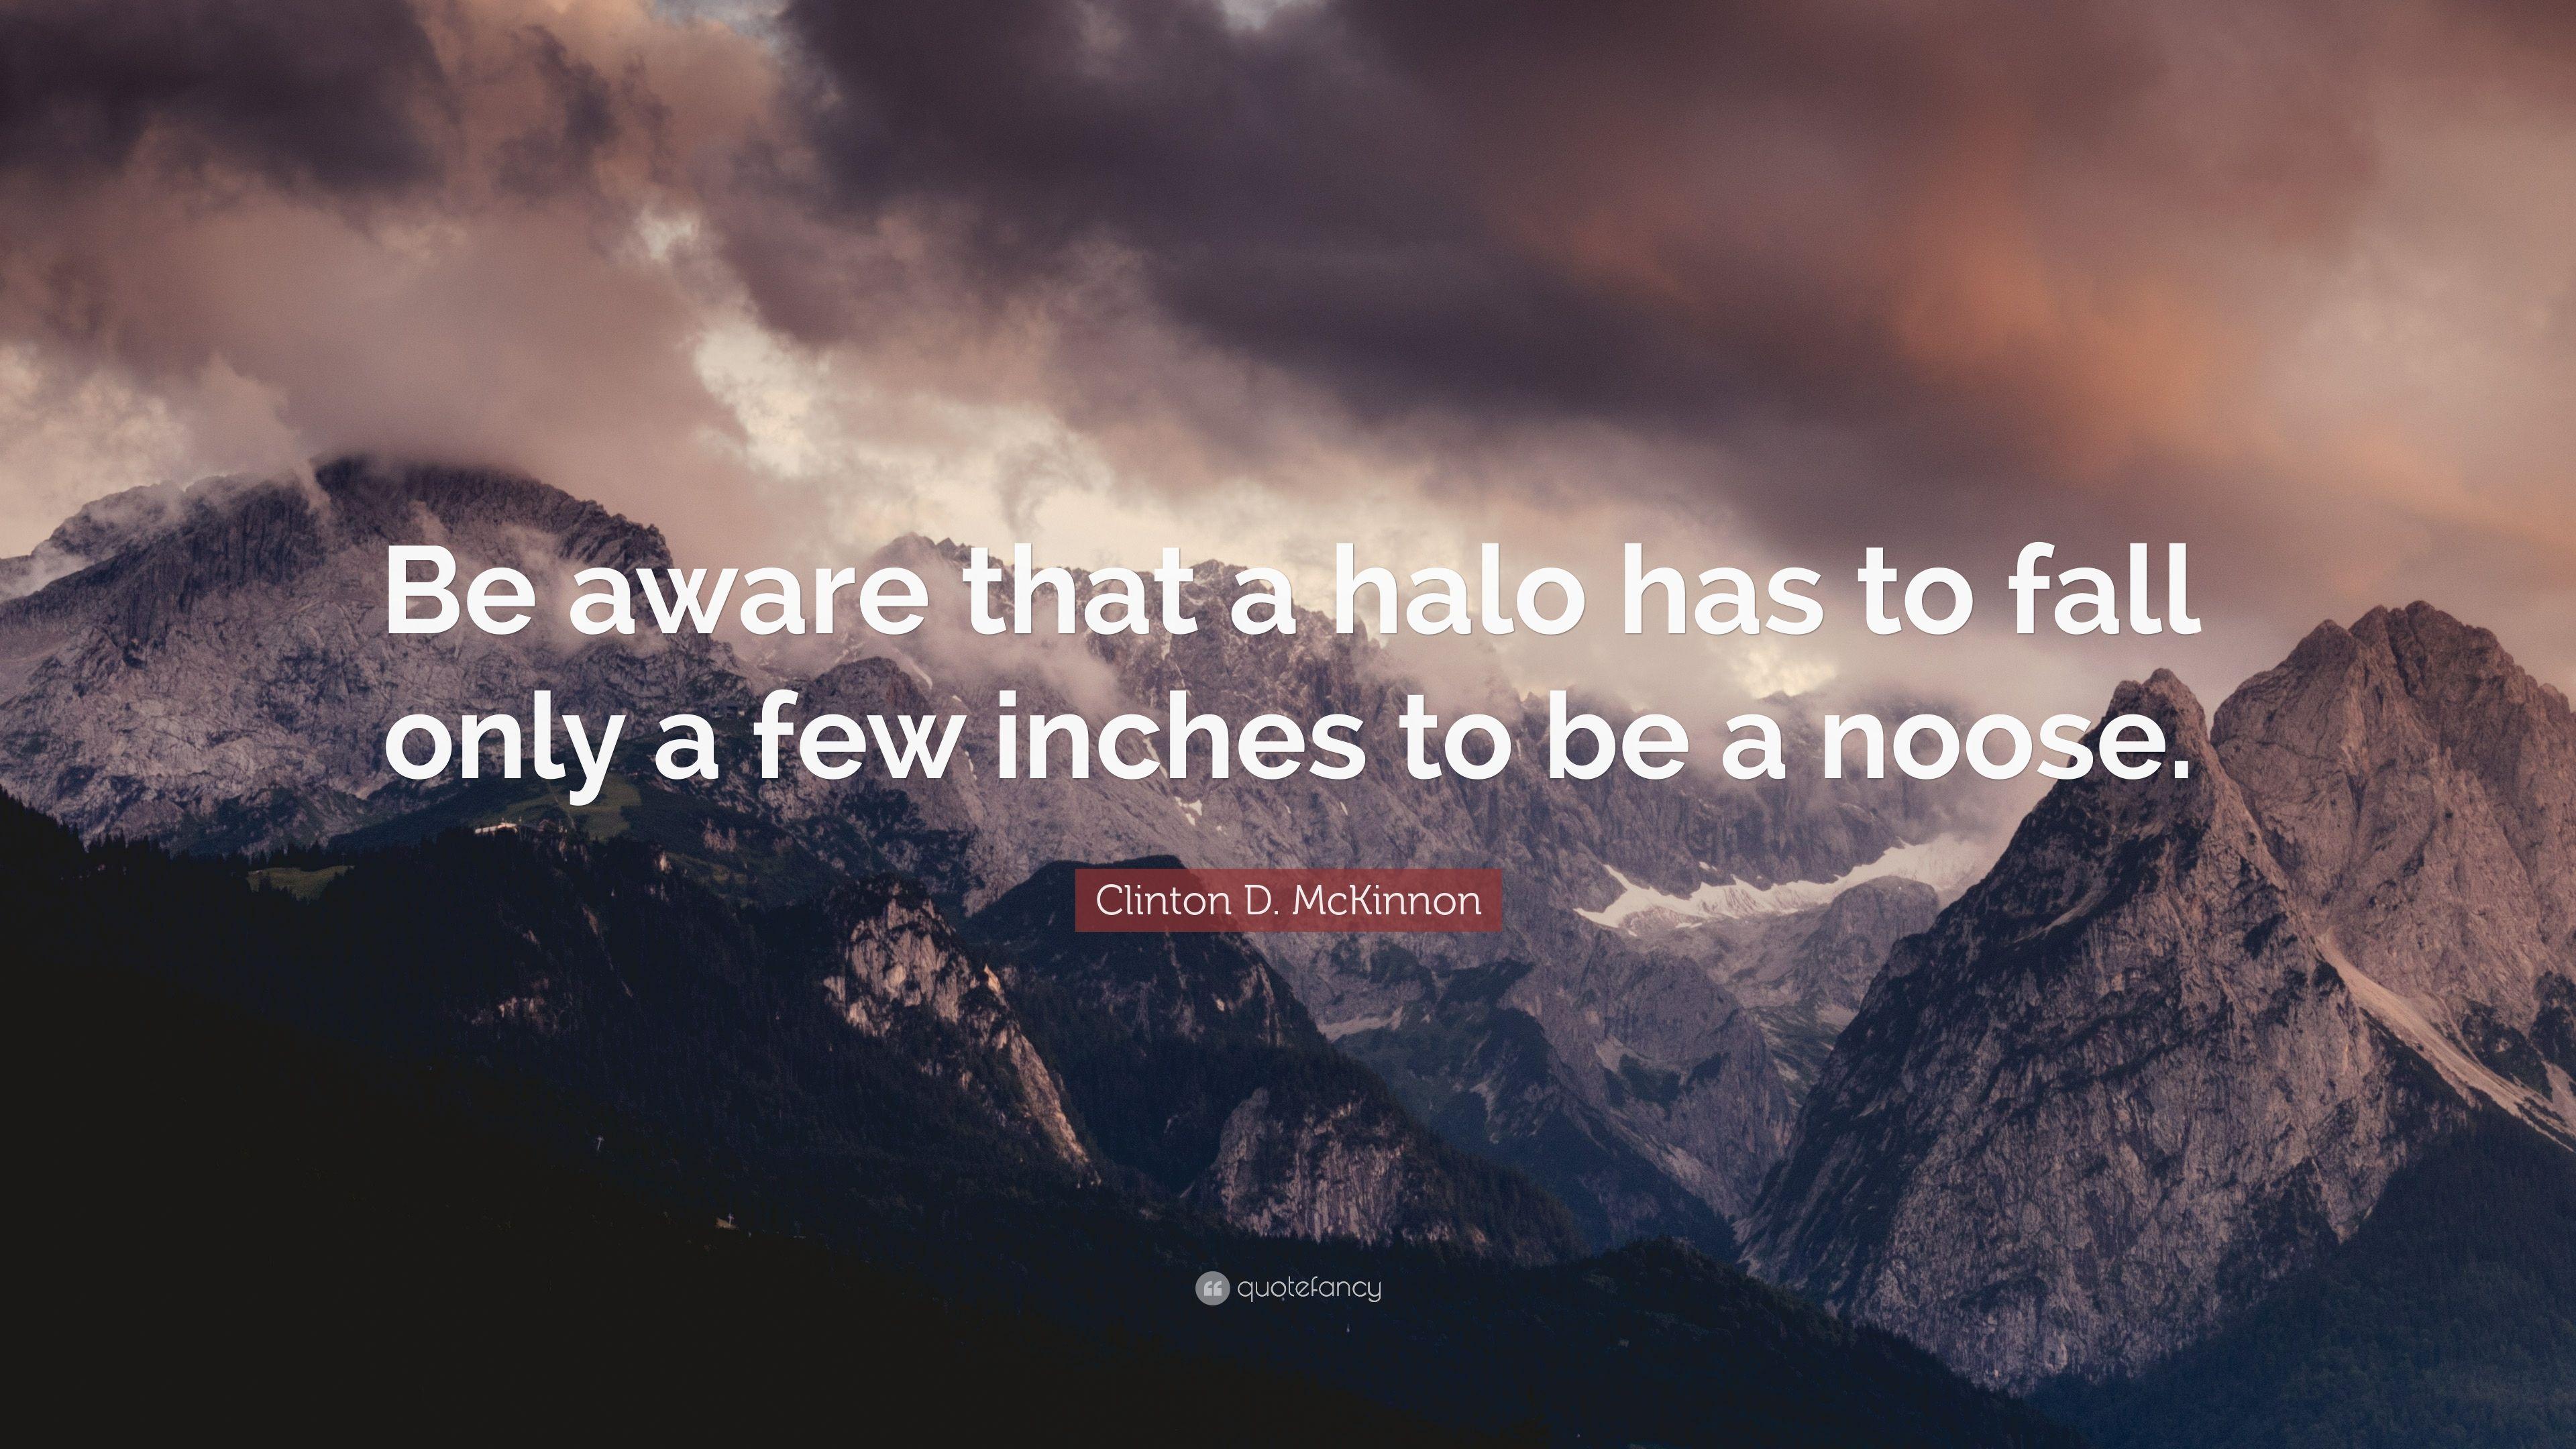 Clinton D. McKinnon Quote: “Be aware that a halo has to fall only